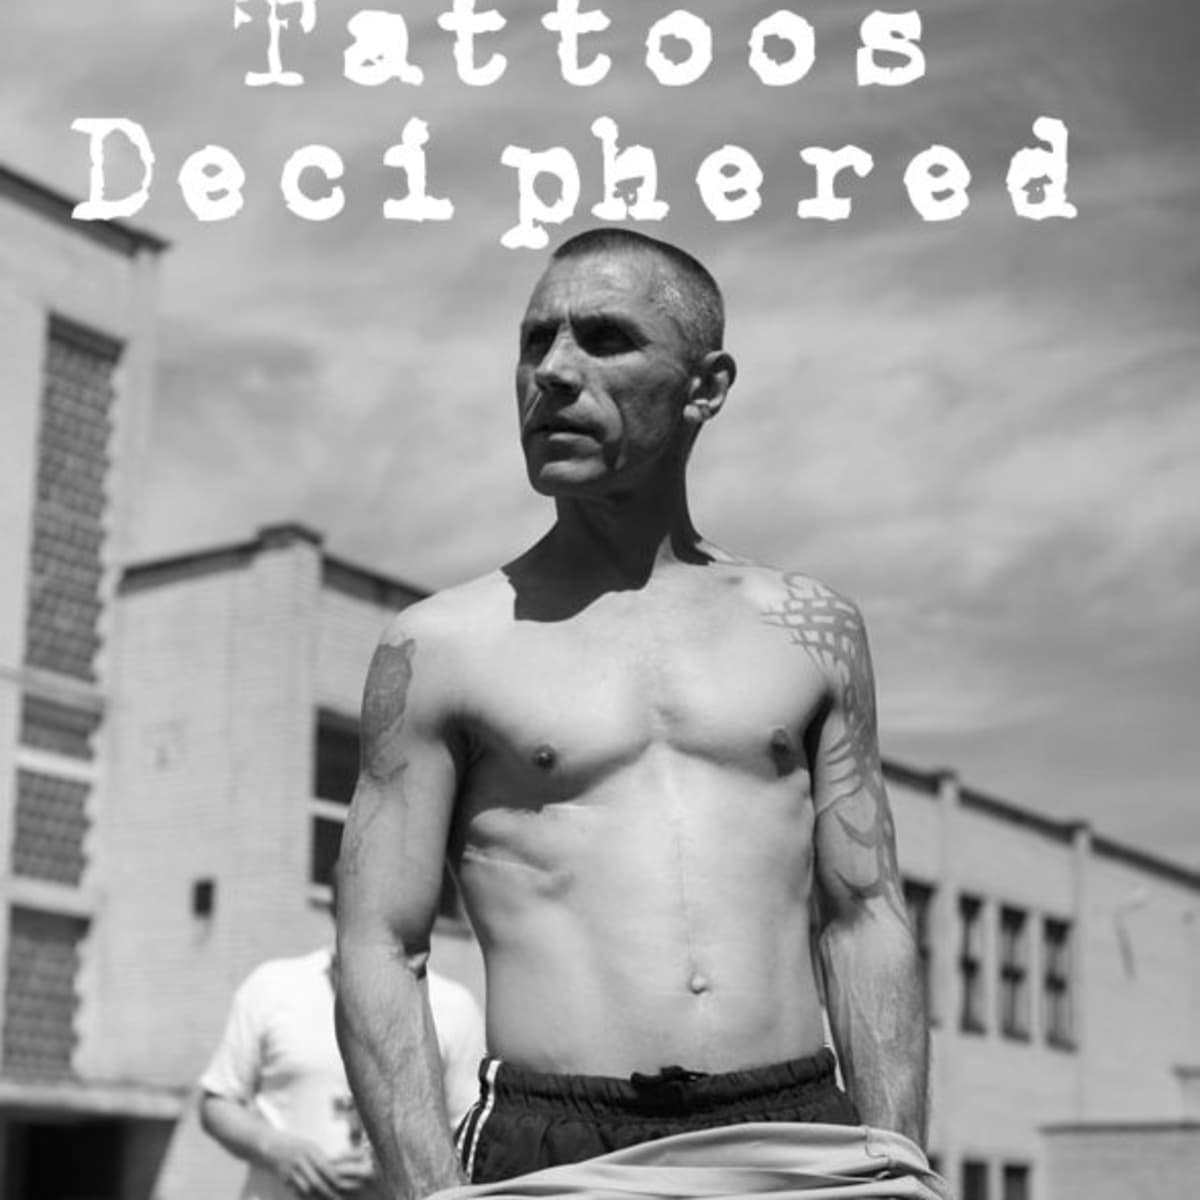 Prison Tattoos and Their Meanings - TatRing